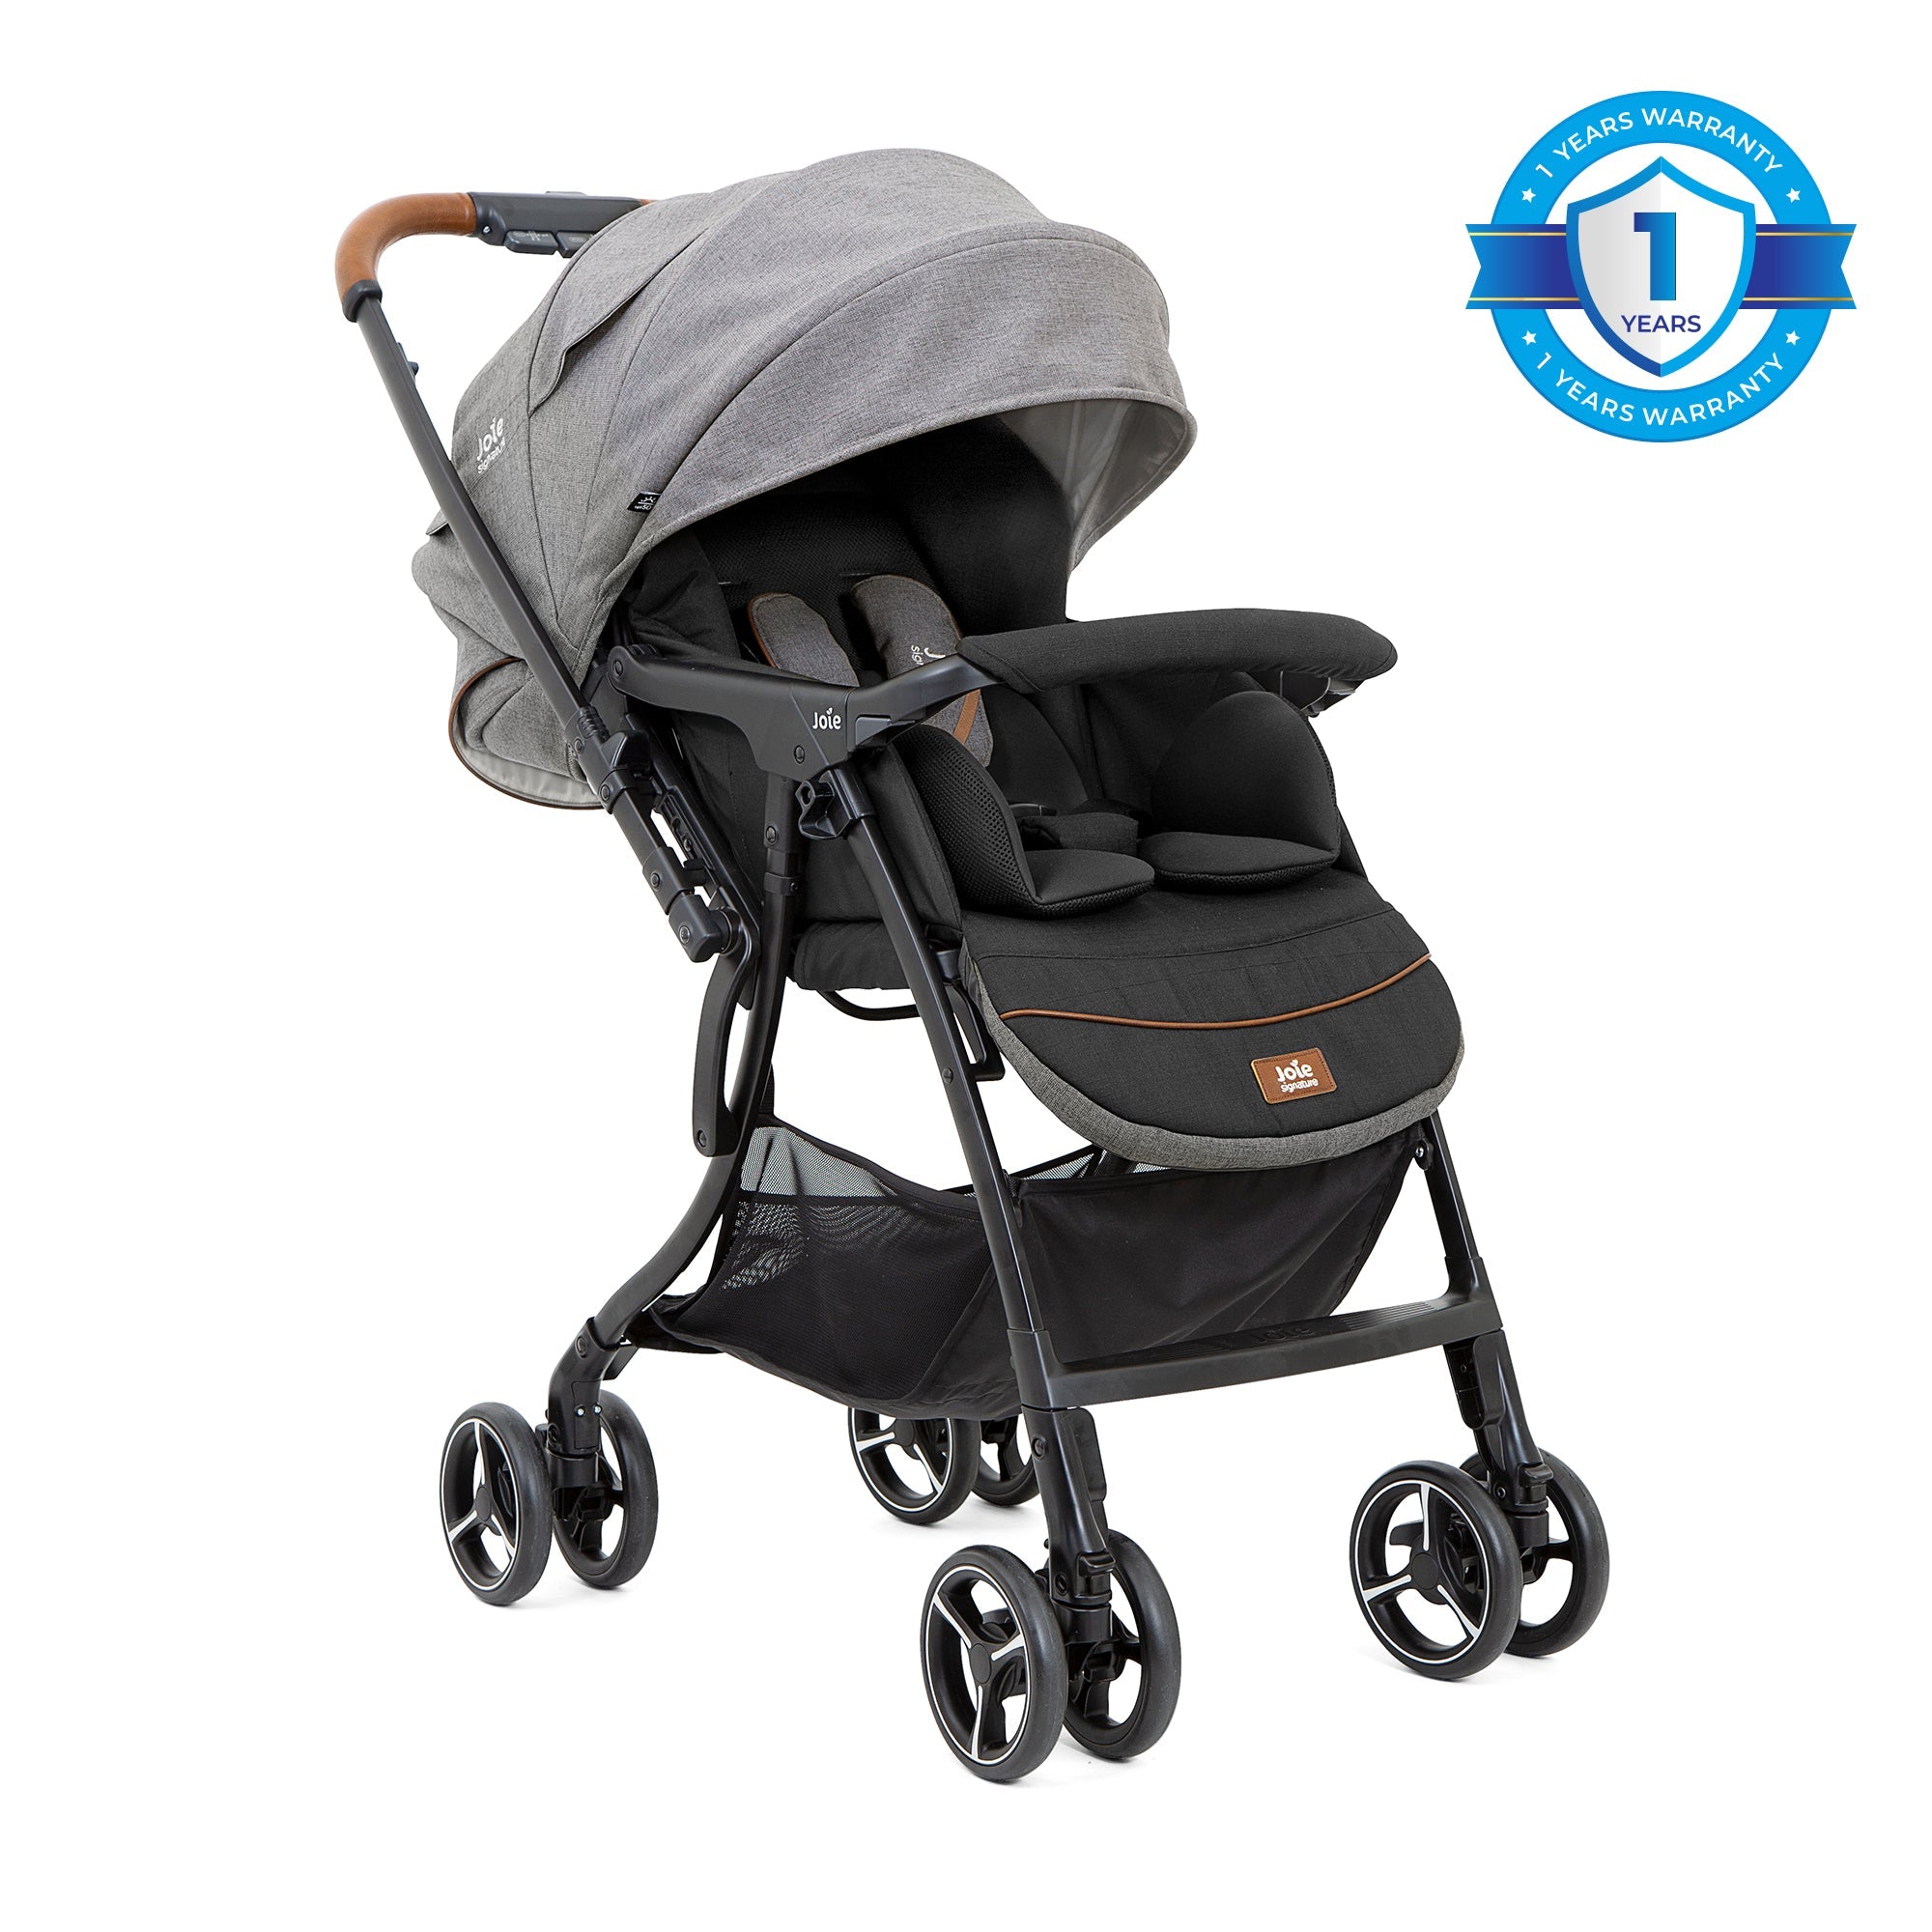 Joie 4Wd Drift Sma Baggi Stroller || Fashion - Carbon || Birth+ to 36months - Toys4All.in